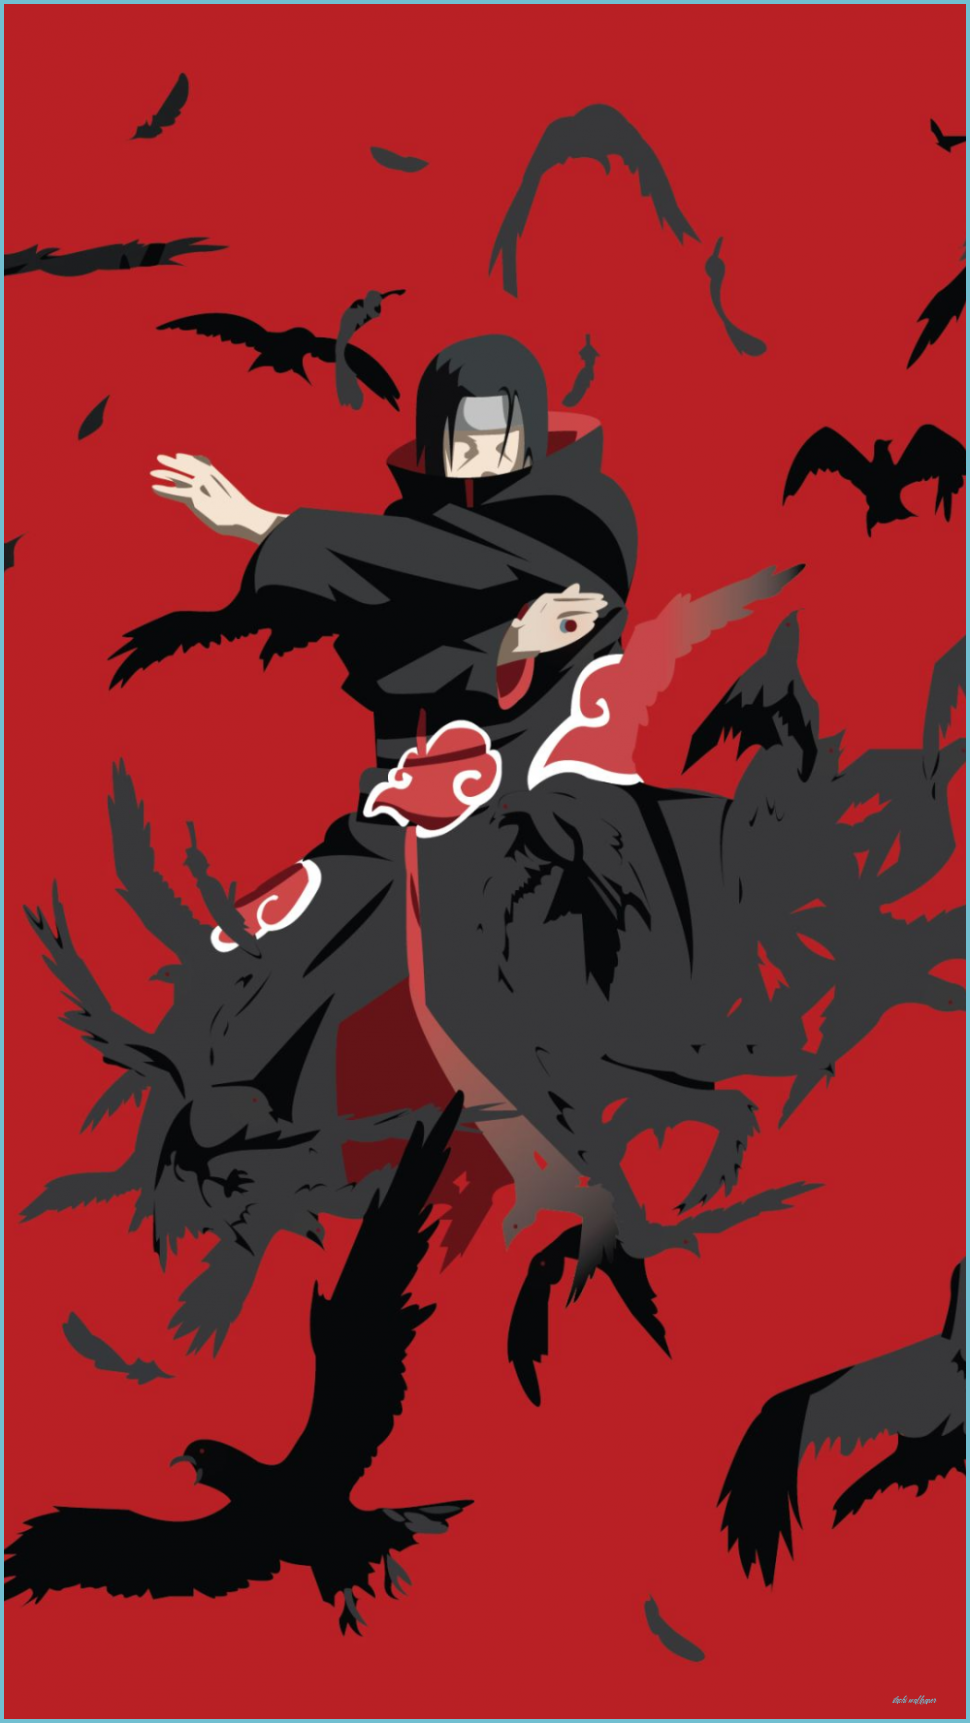 Why You Must Experience Itachi Wallpaper At Least Once In